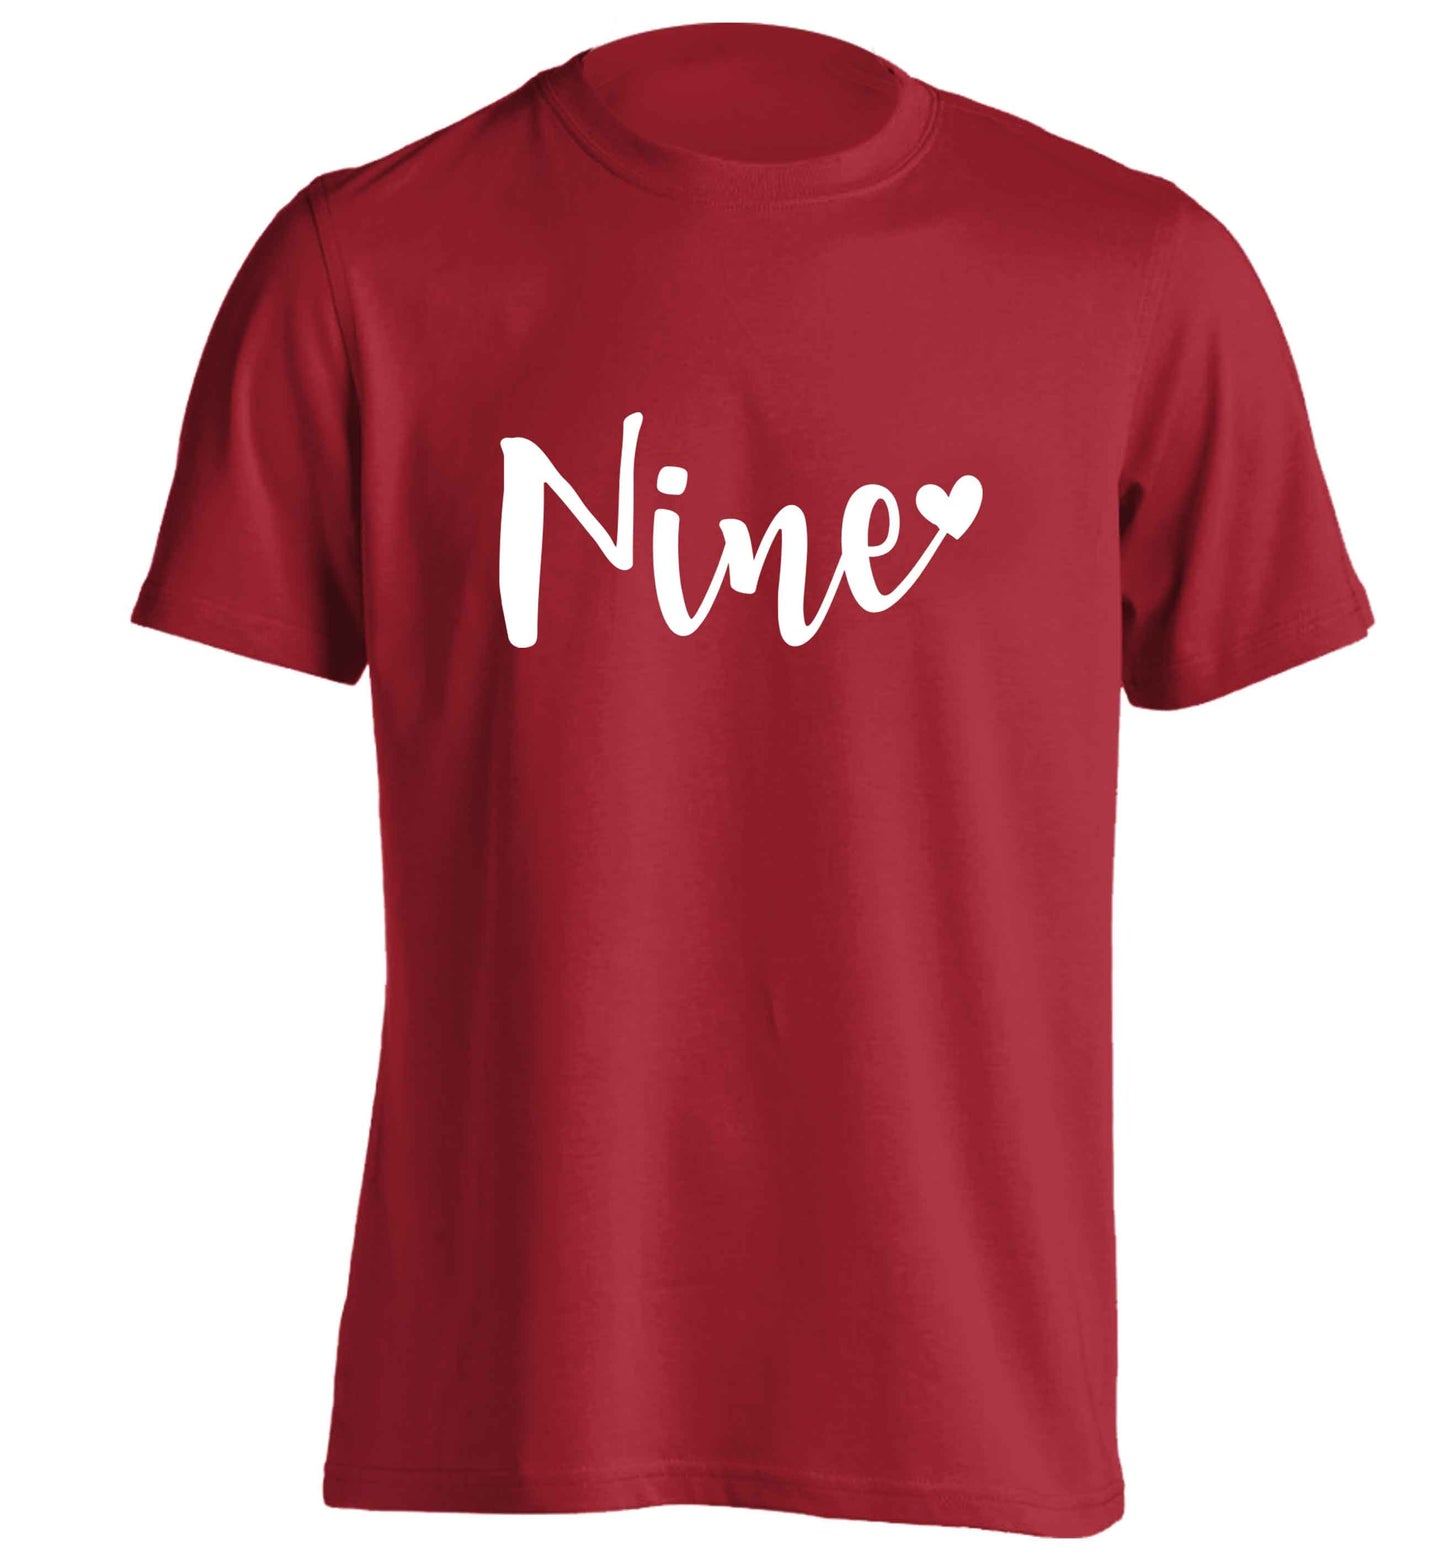 Nine and heart adults unisex red Tshirt 2XL